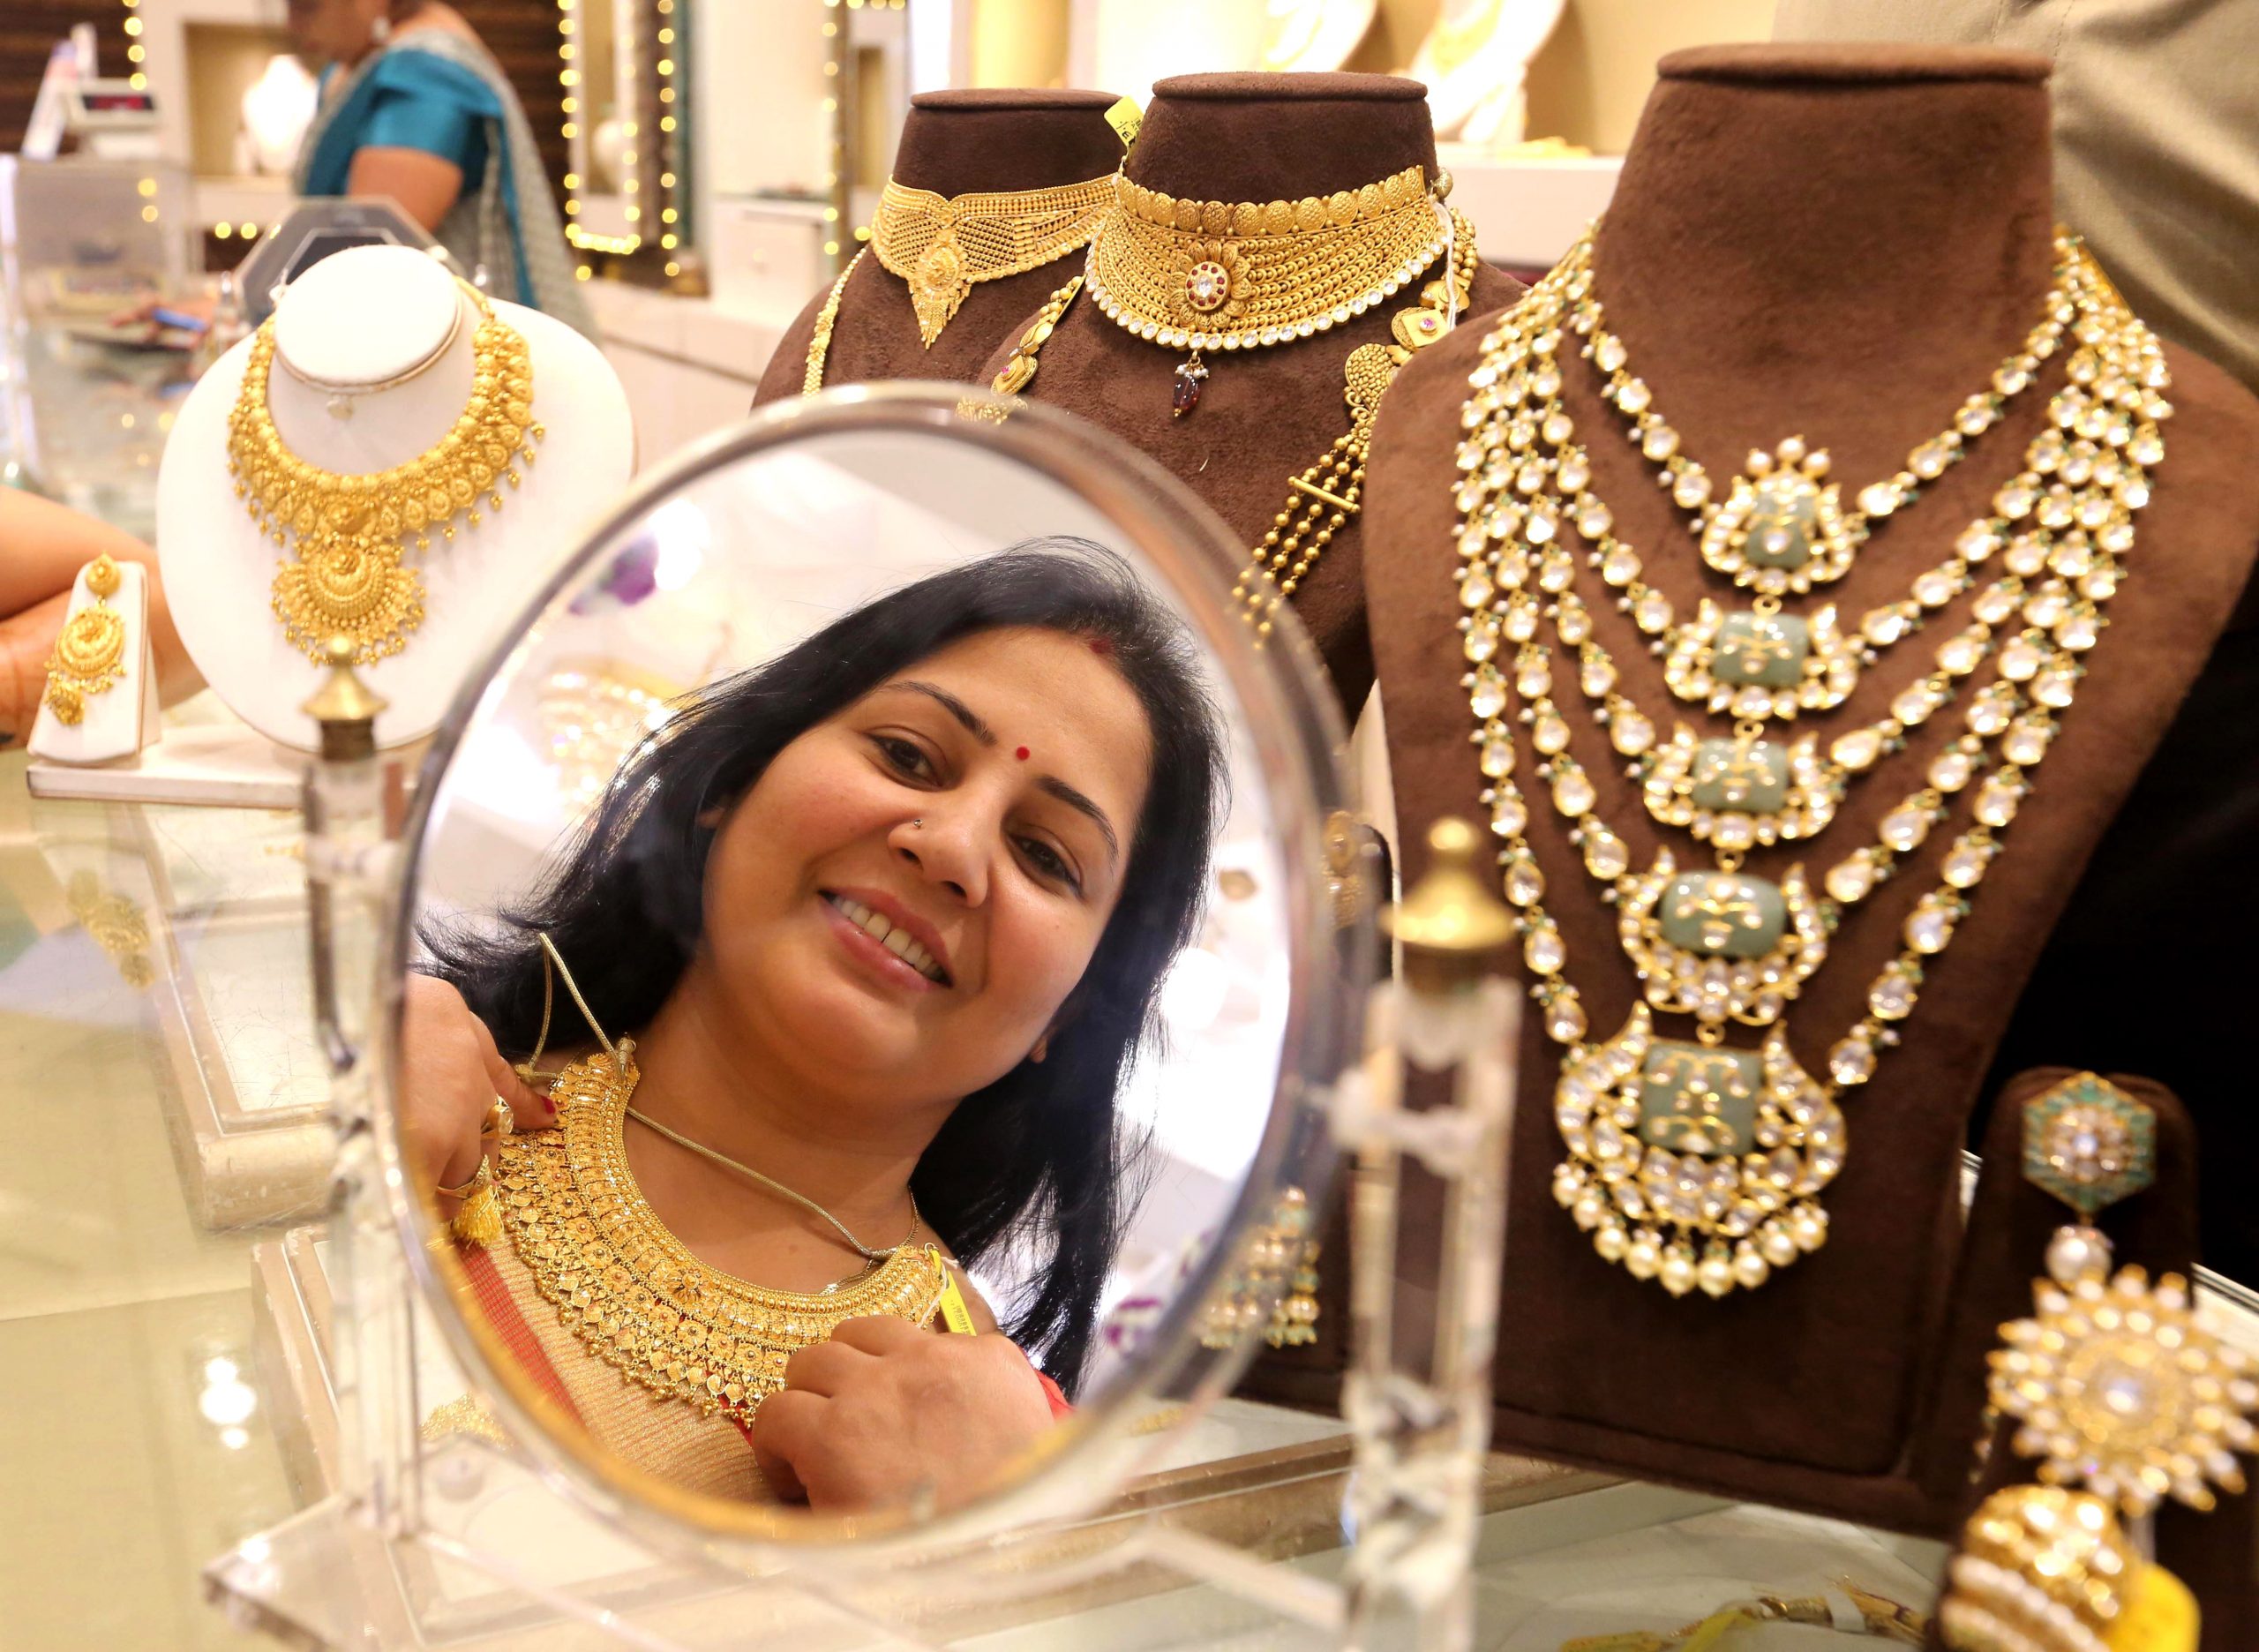 A Woman trying gold ornaments to purchase at a jewellery shop